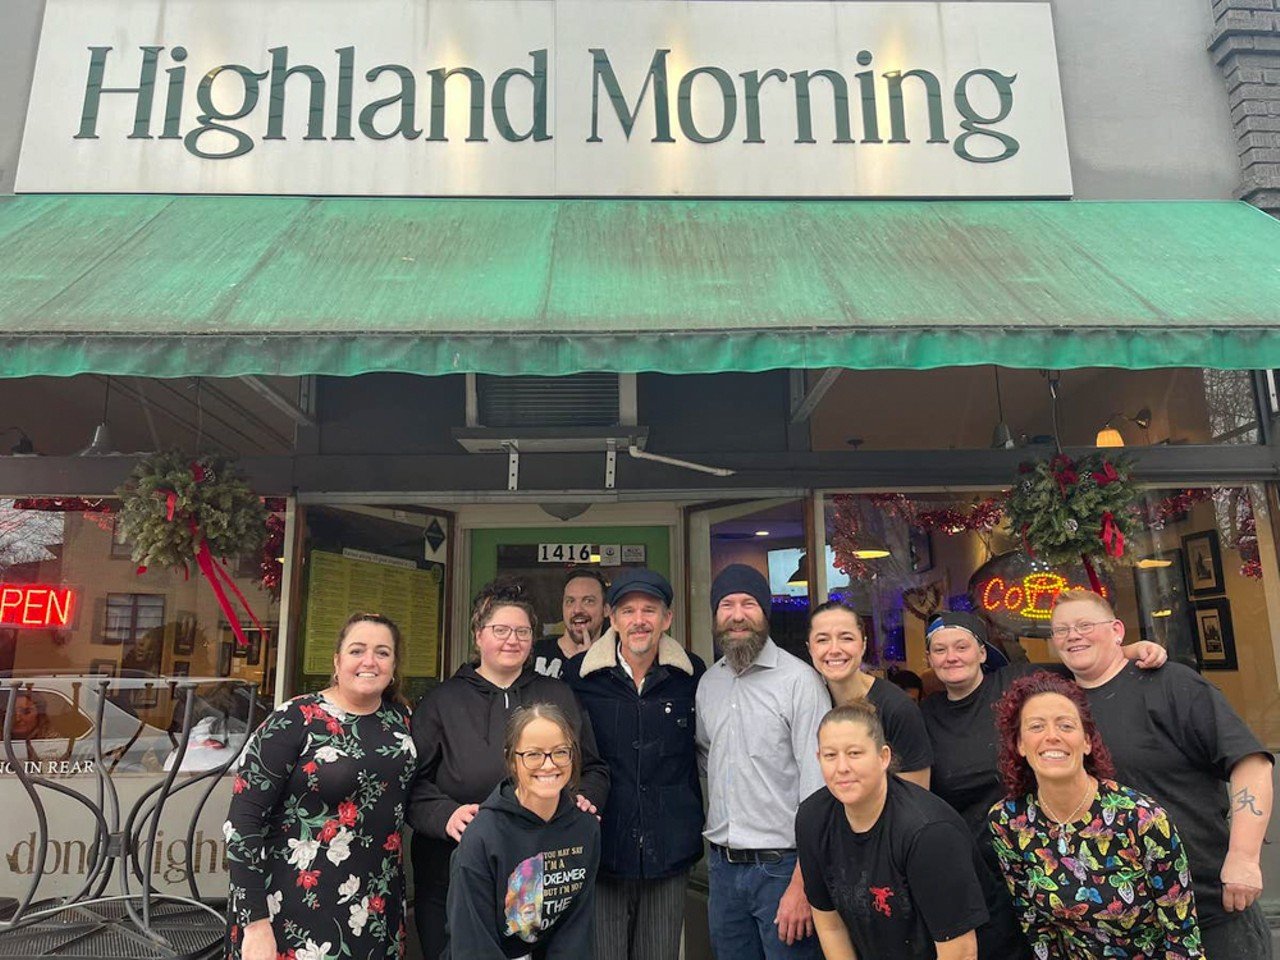  Highland Morning 
1416 Bardstown Rd. 
&#147;Ethan Hawke and his wife could not of [sic] been more gracious and humble,&#148; according to the restaurant&#146;s Facebook page. &#147;Made our morning.&#148;
Photo via Jennifer Leslie.